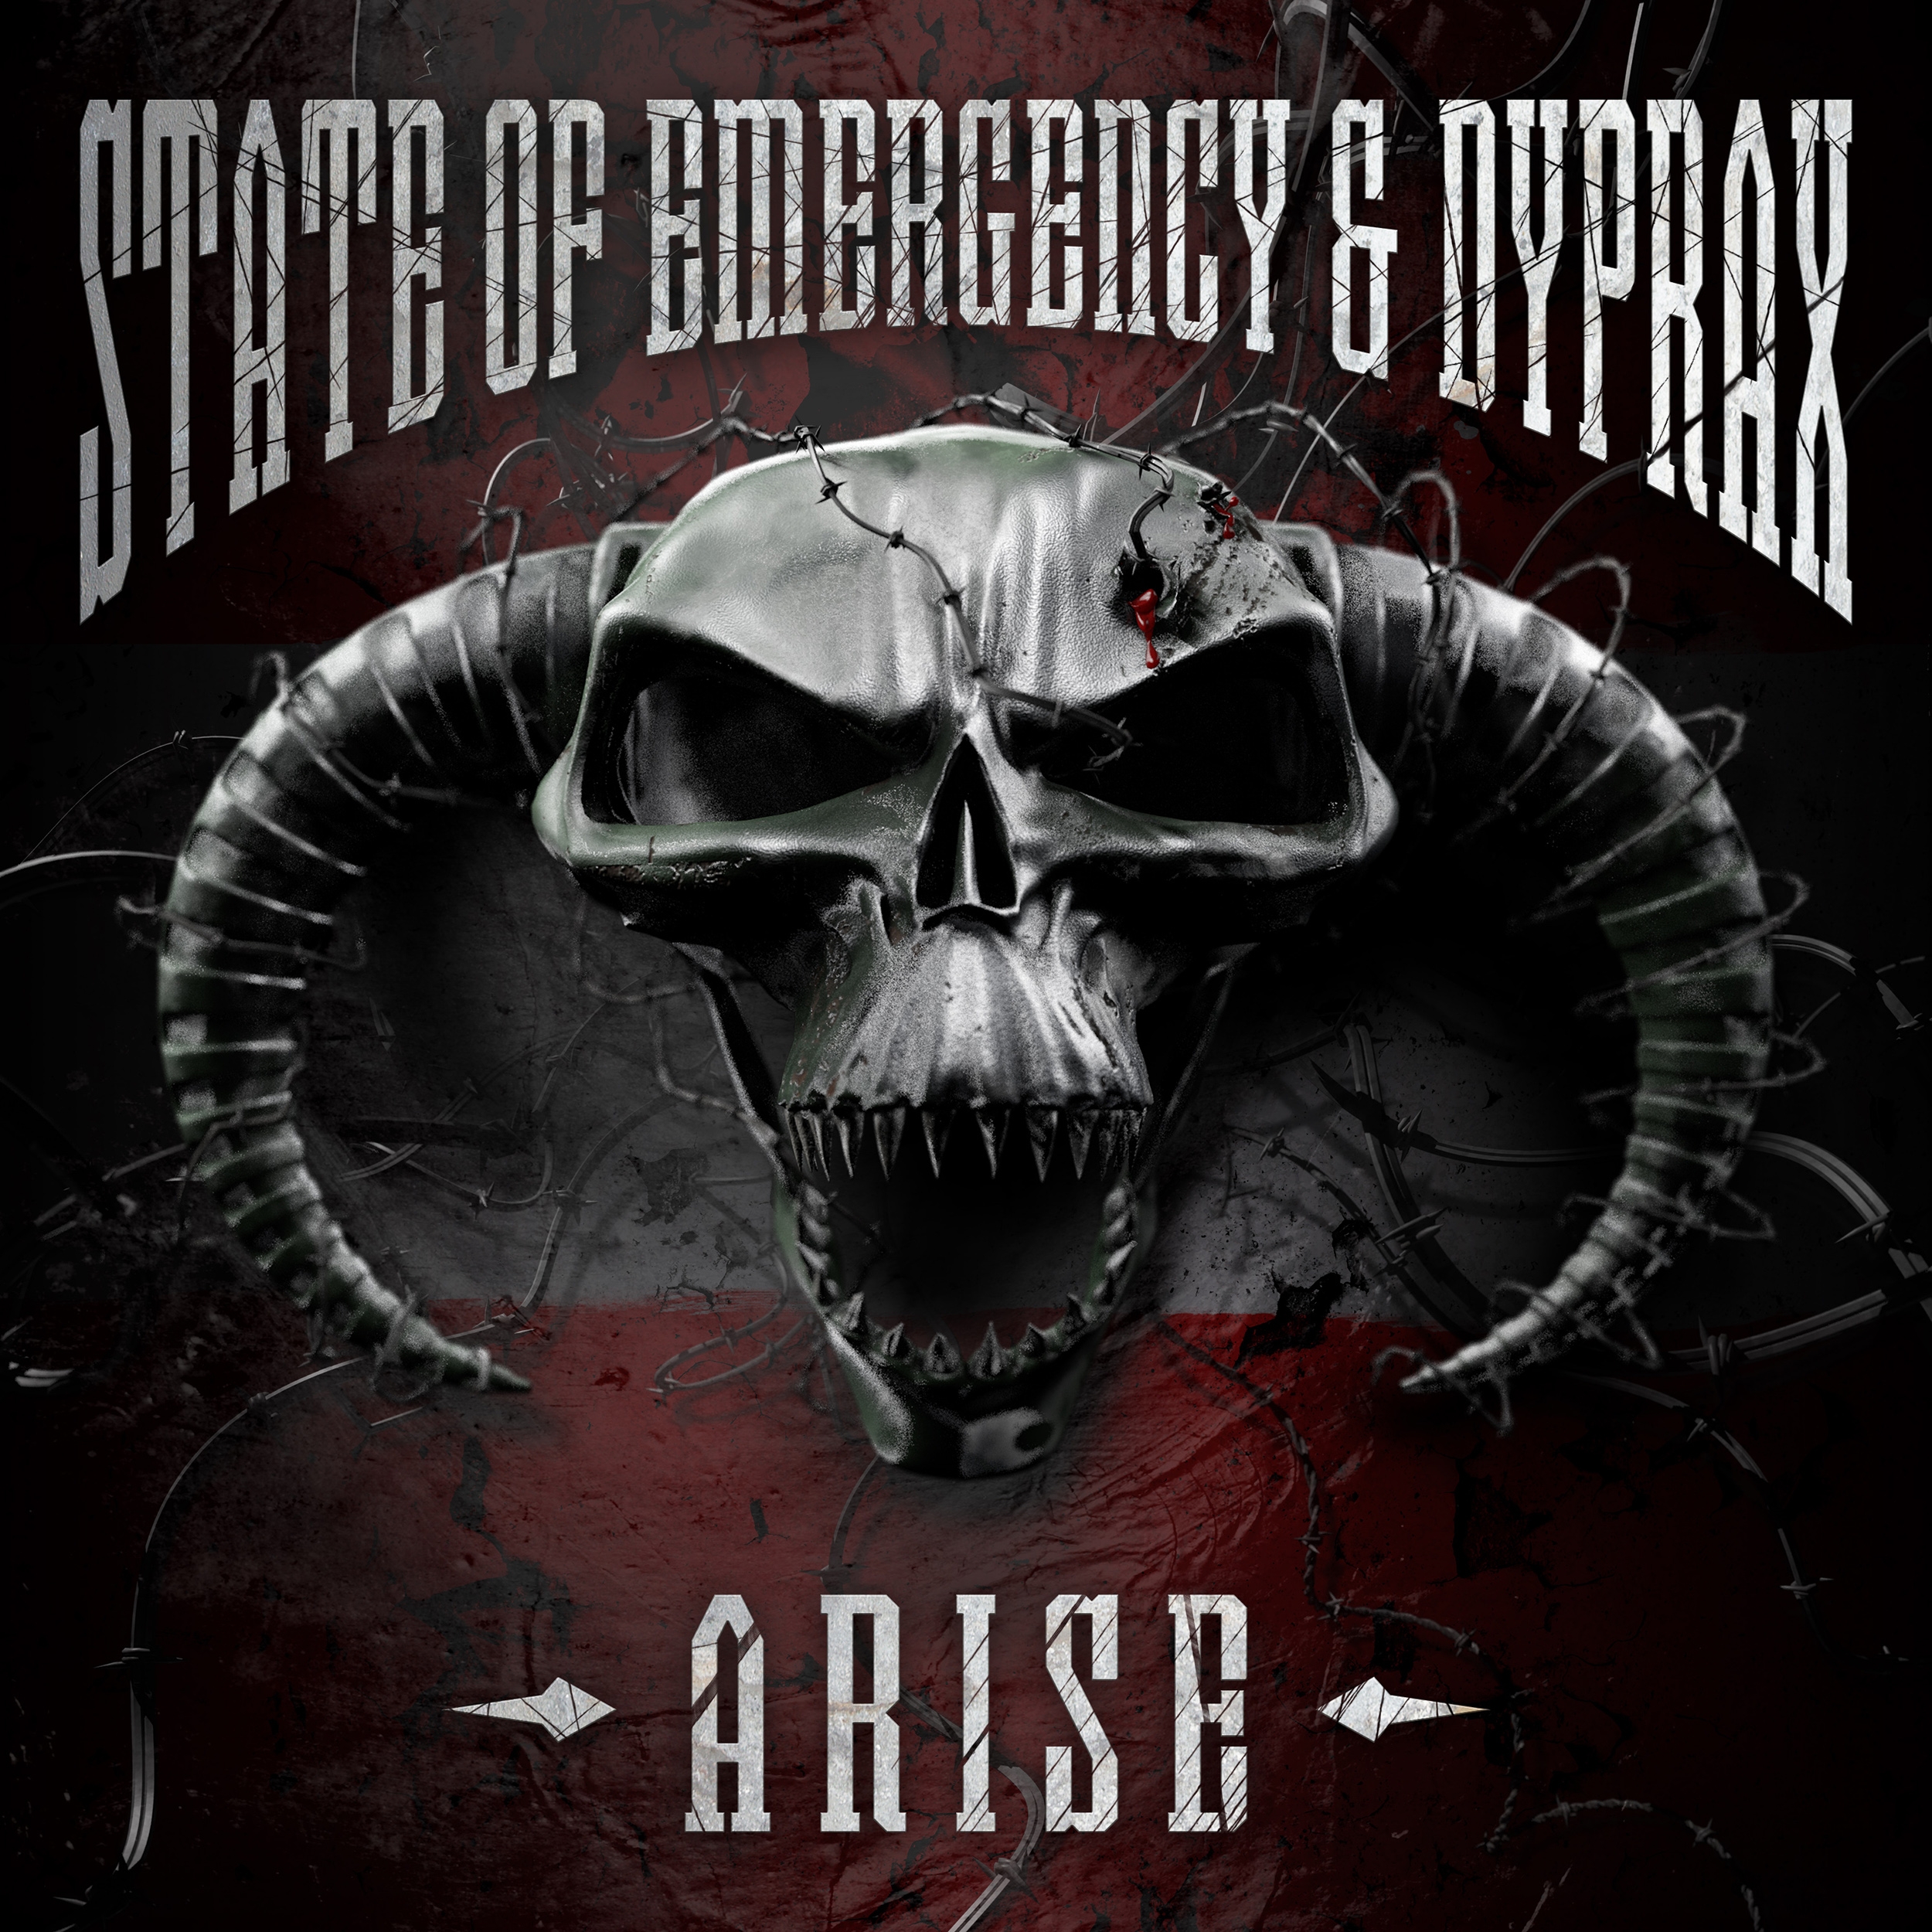 State of Emergency & Dyprax - Arise (Masters of Hardcore Austria Anthem) -  MP3 and WAV downloads at Hardtunes